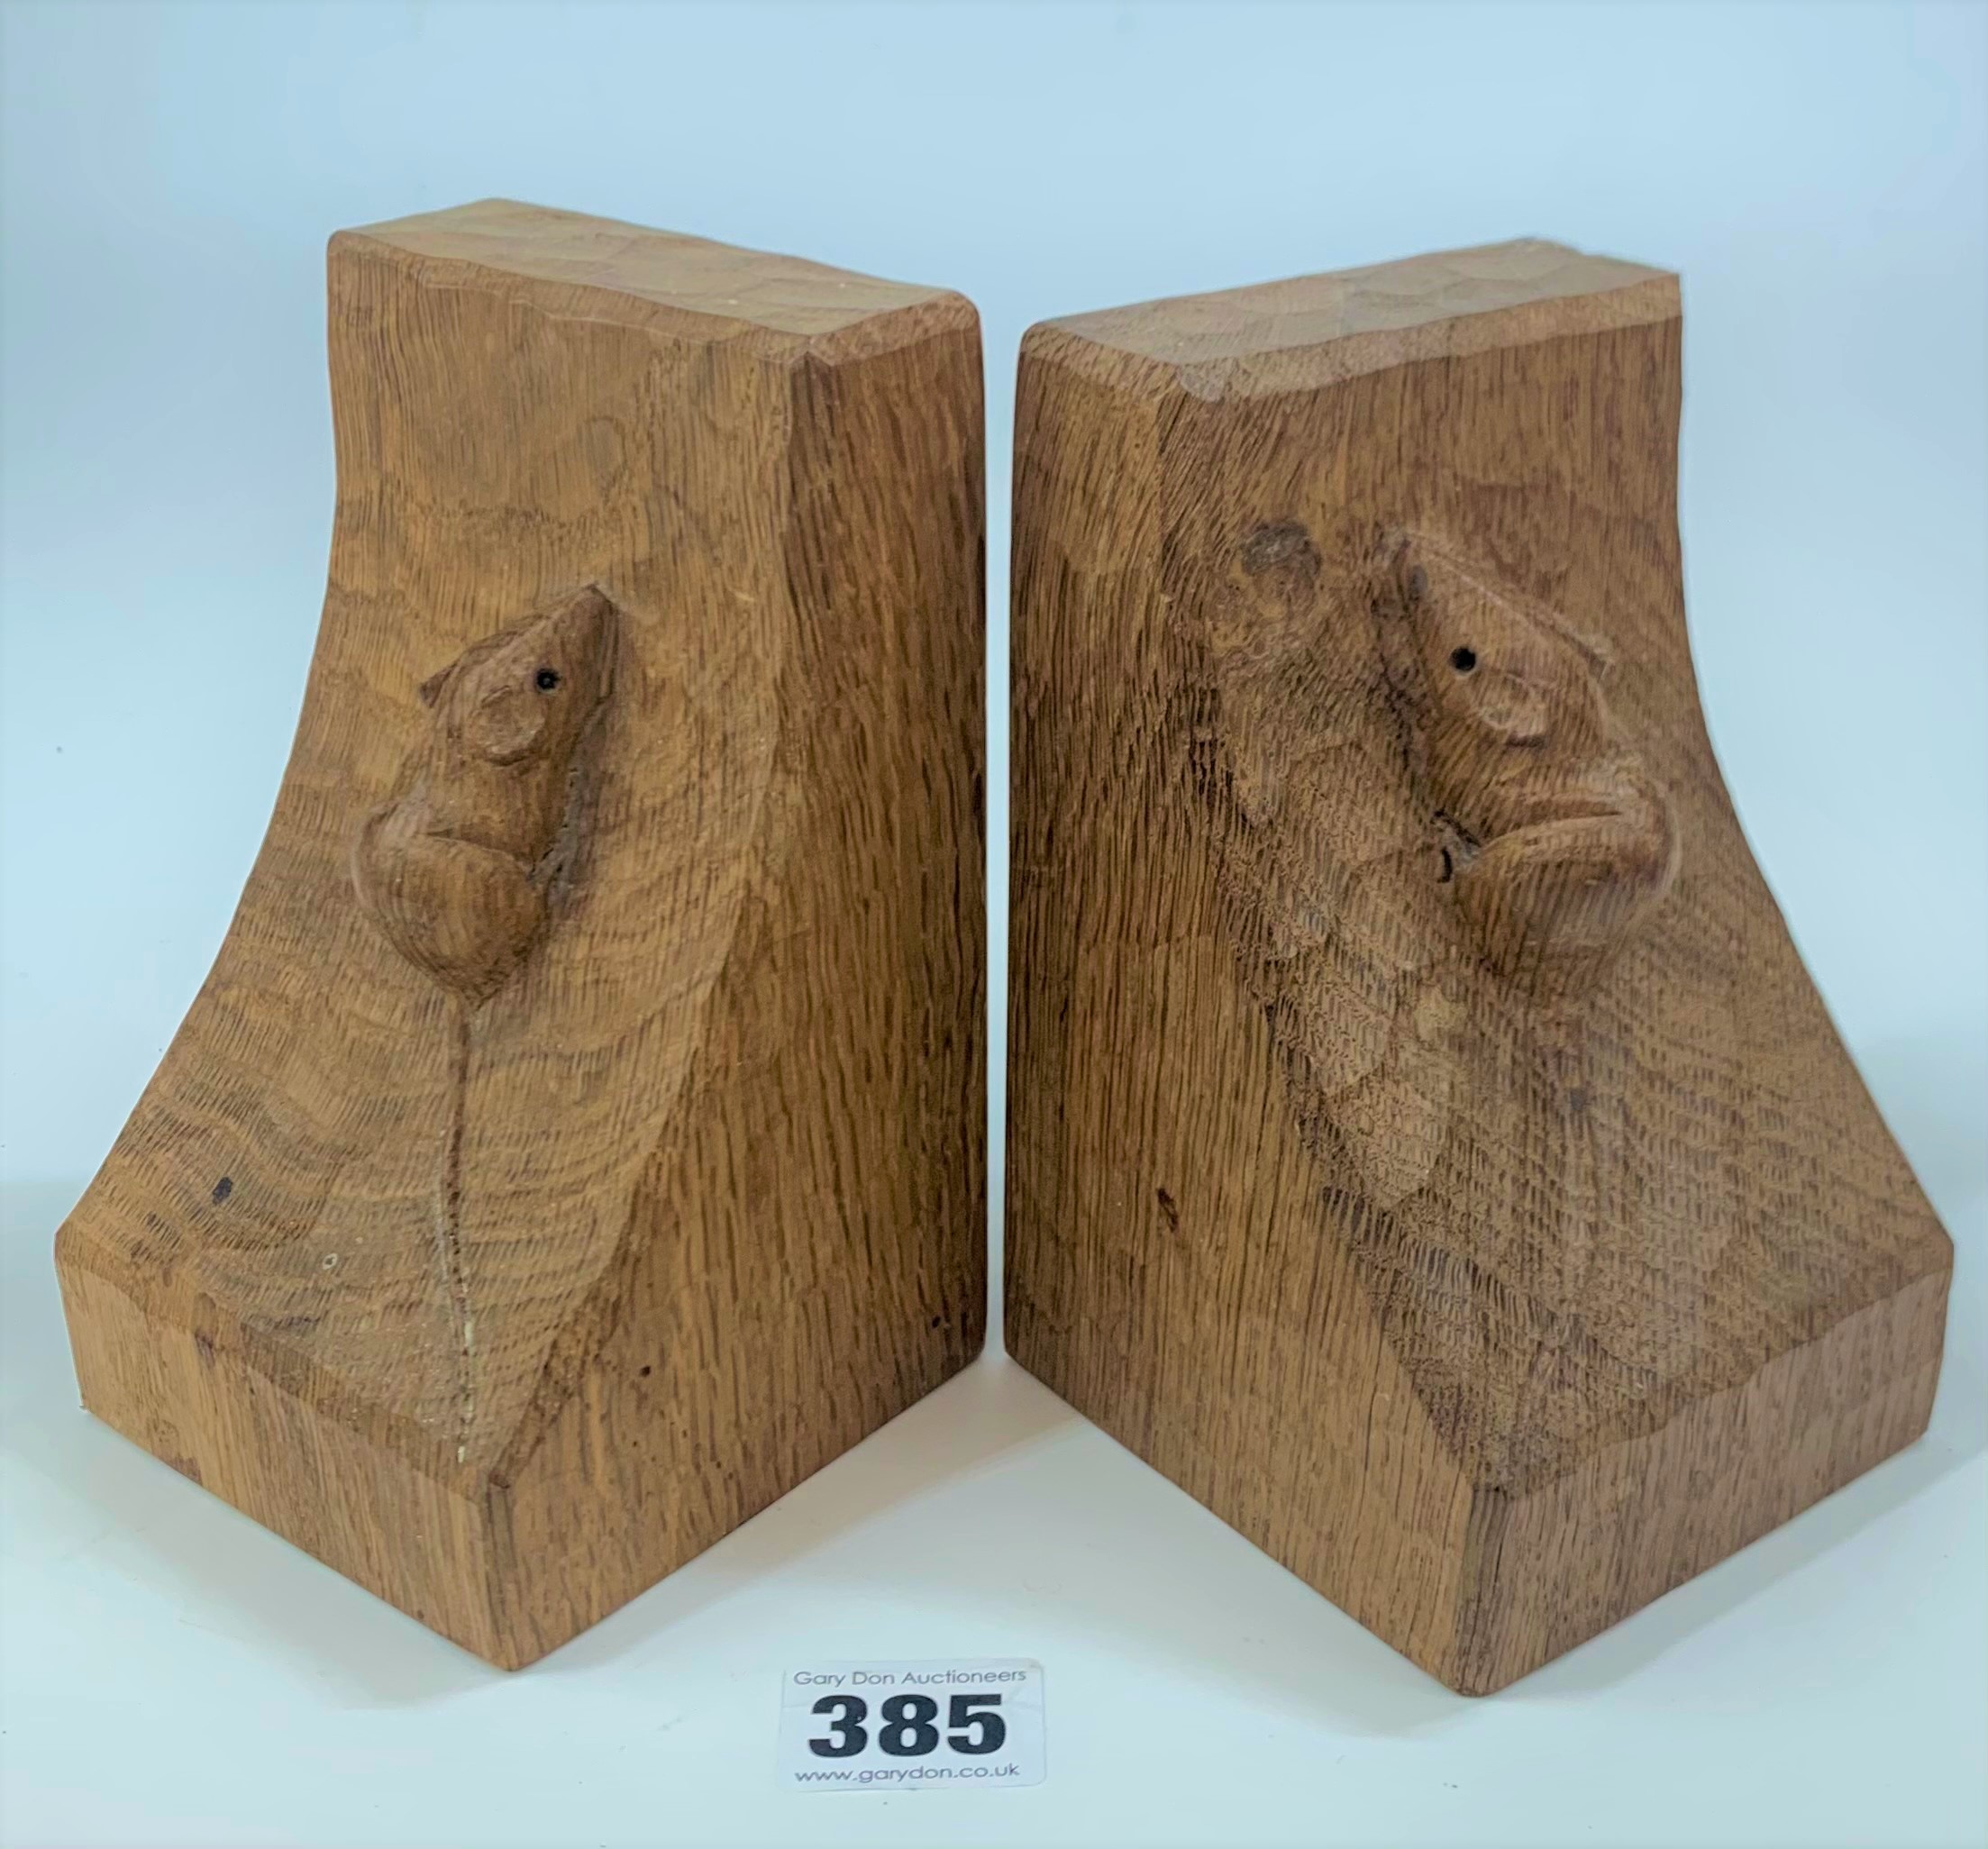 Pair of Mouseman bookends 6” high